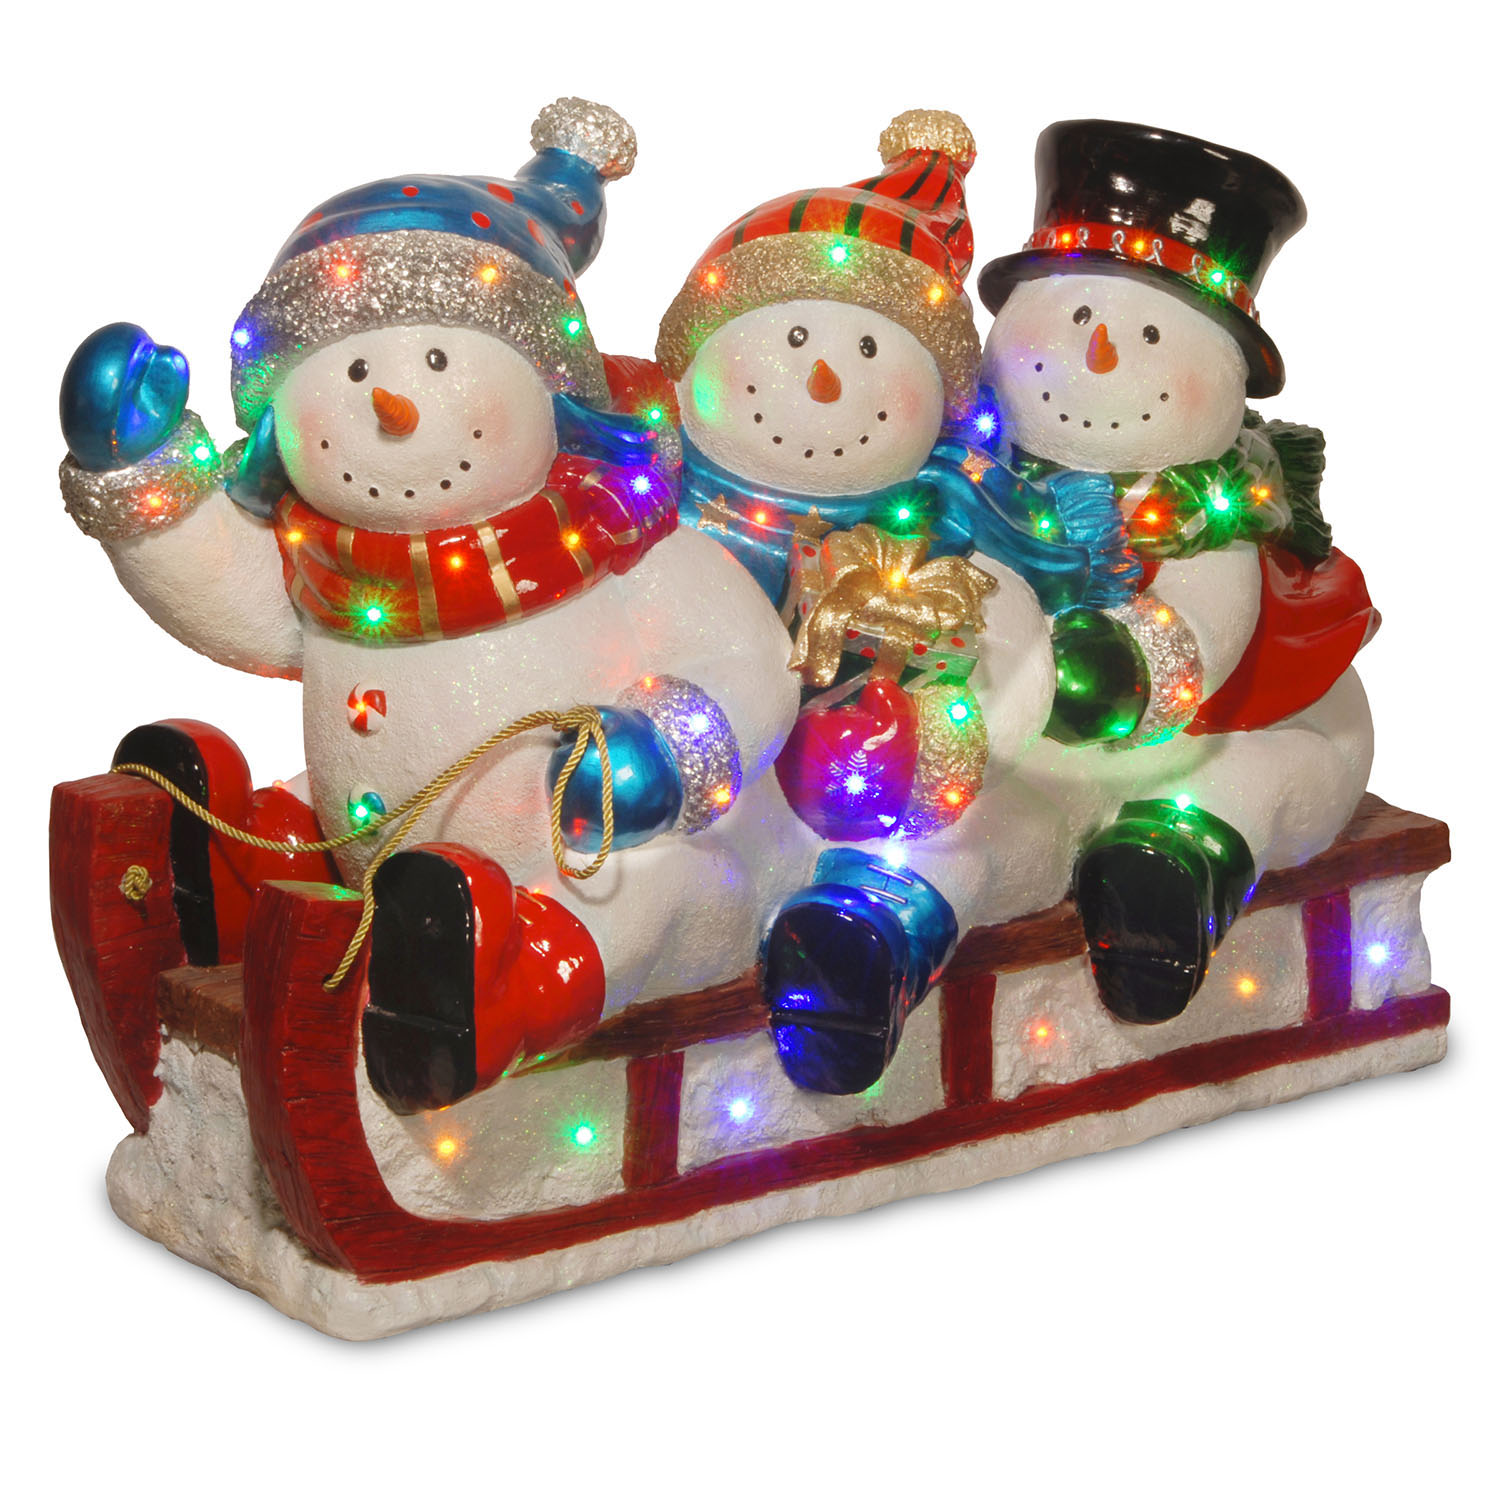 29 Inch Sledding With 3 Snowmen With 48 Multi-colored Led